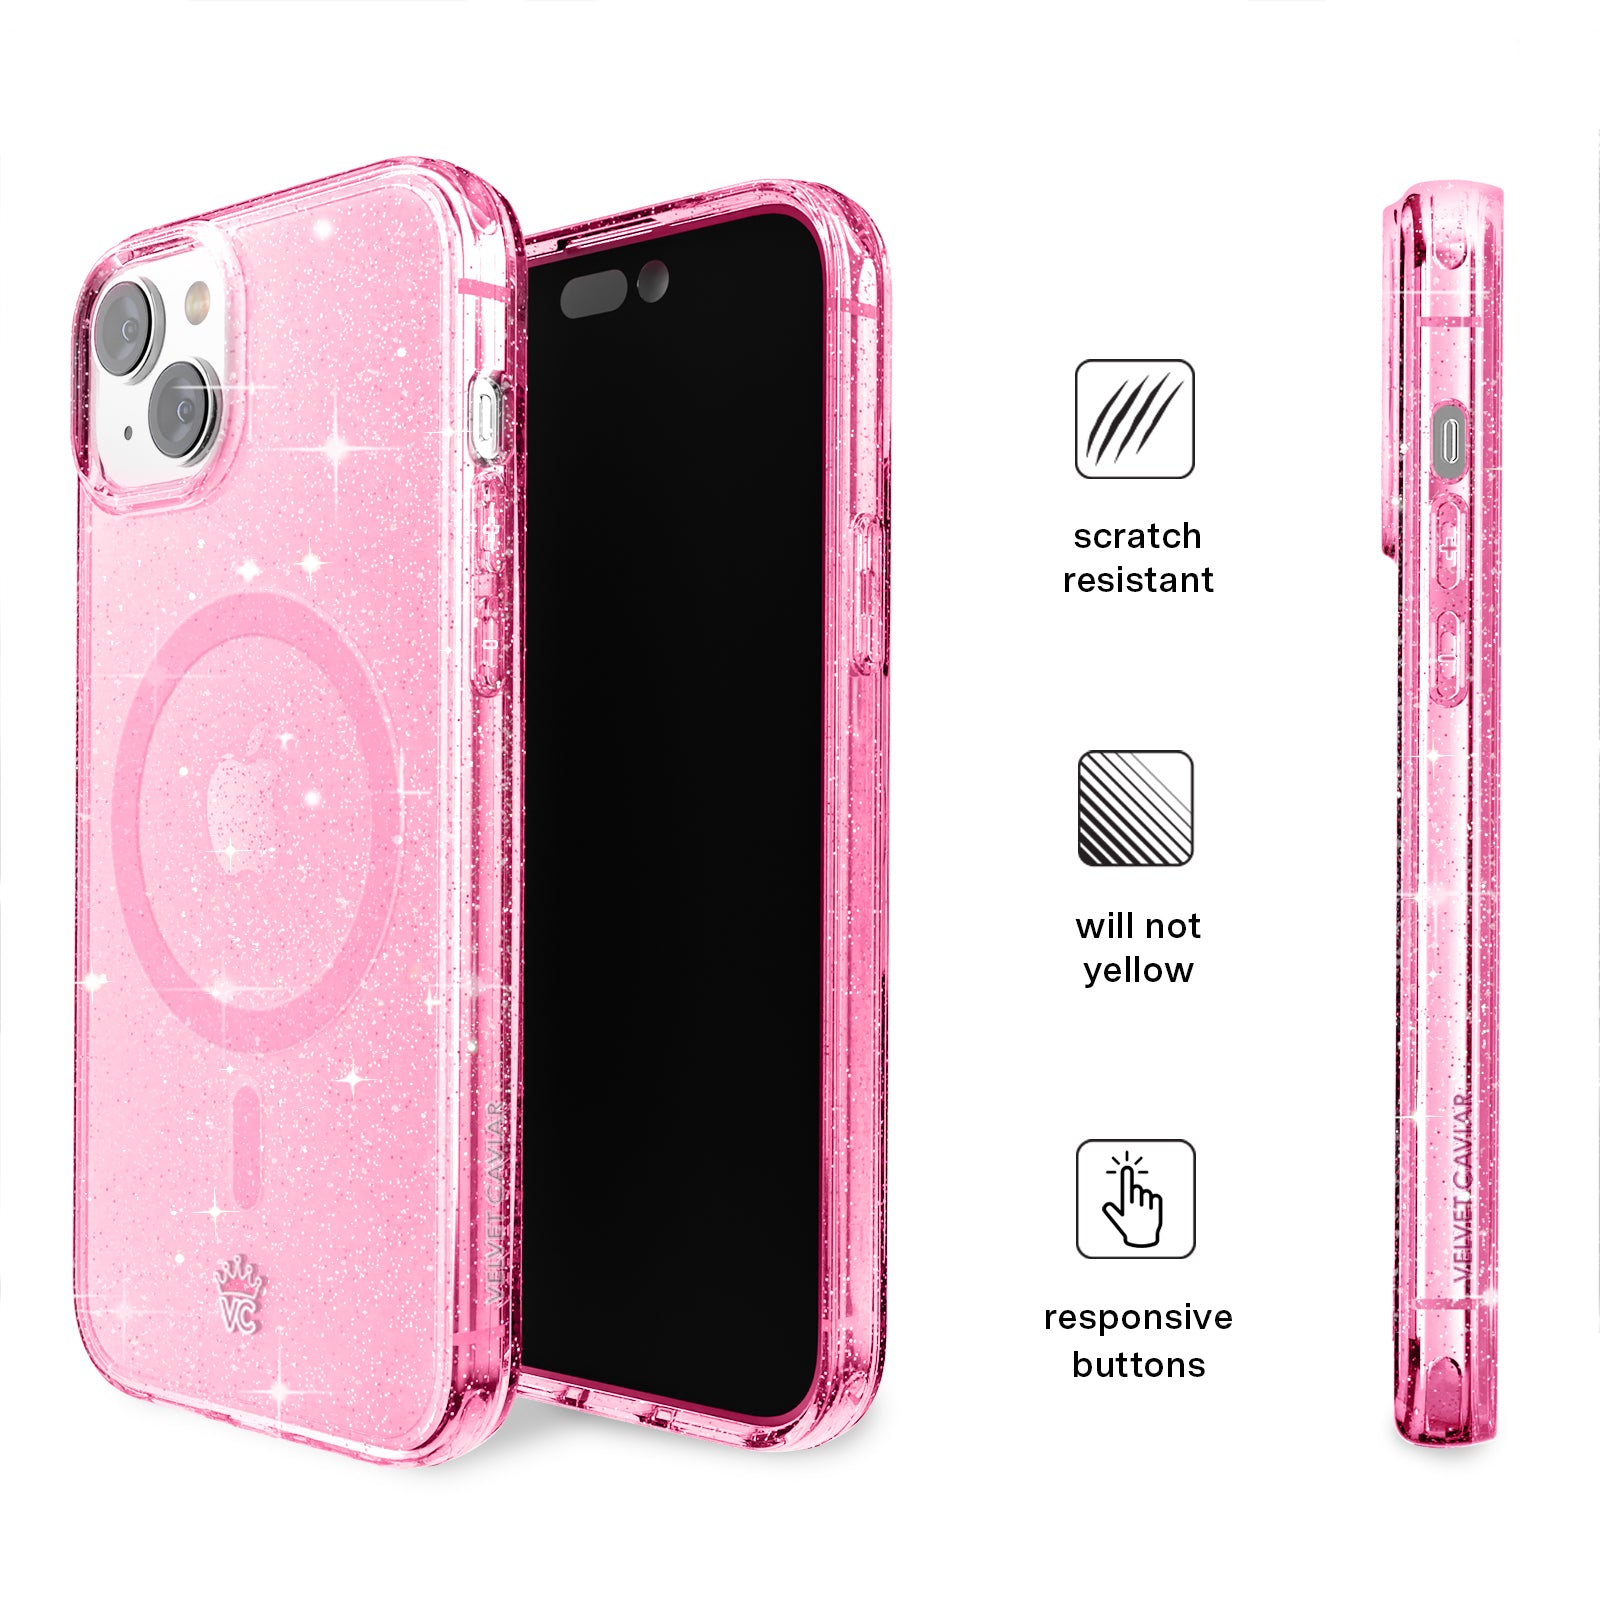 Transparent Glitter Pink Case For Iphone 12 Pro Max